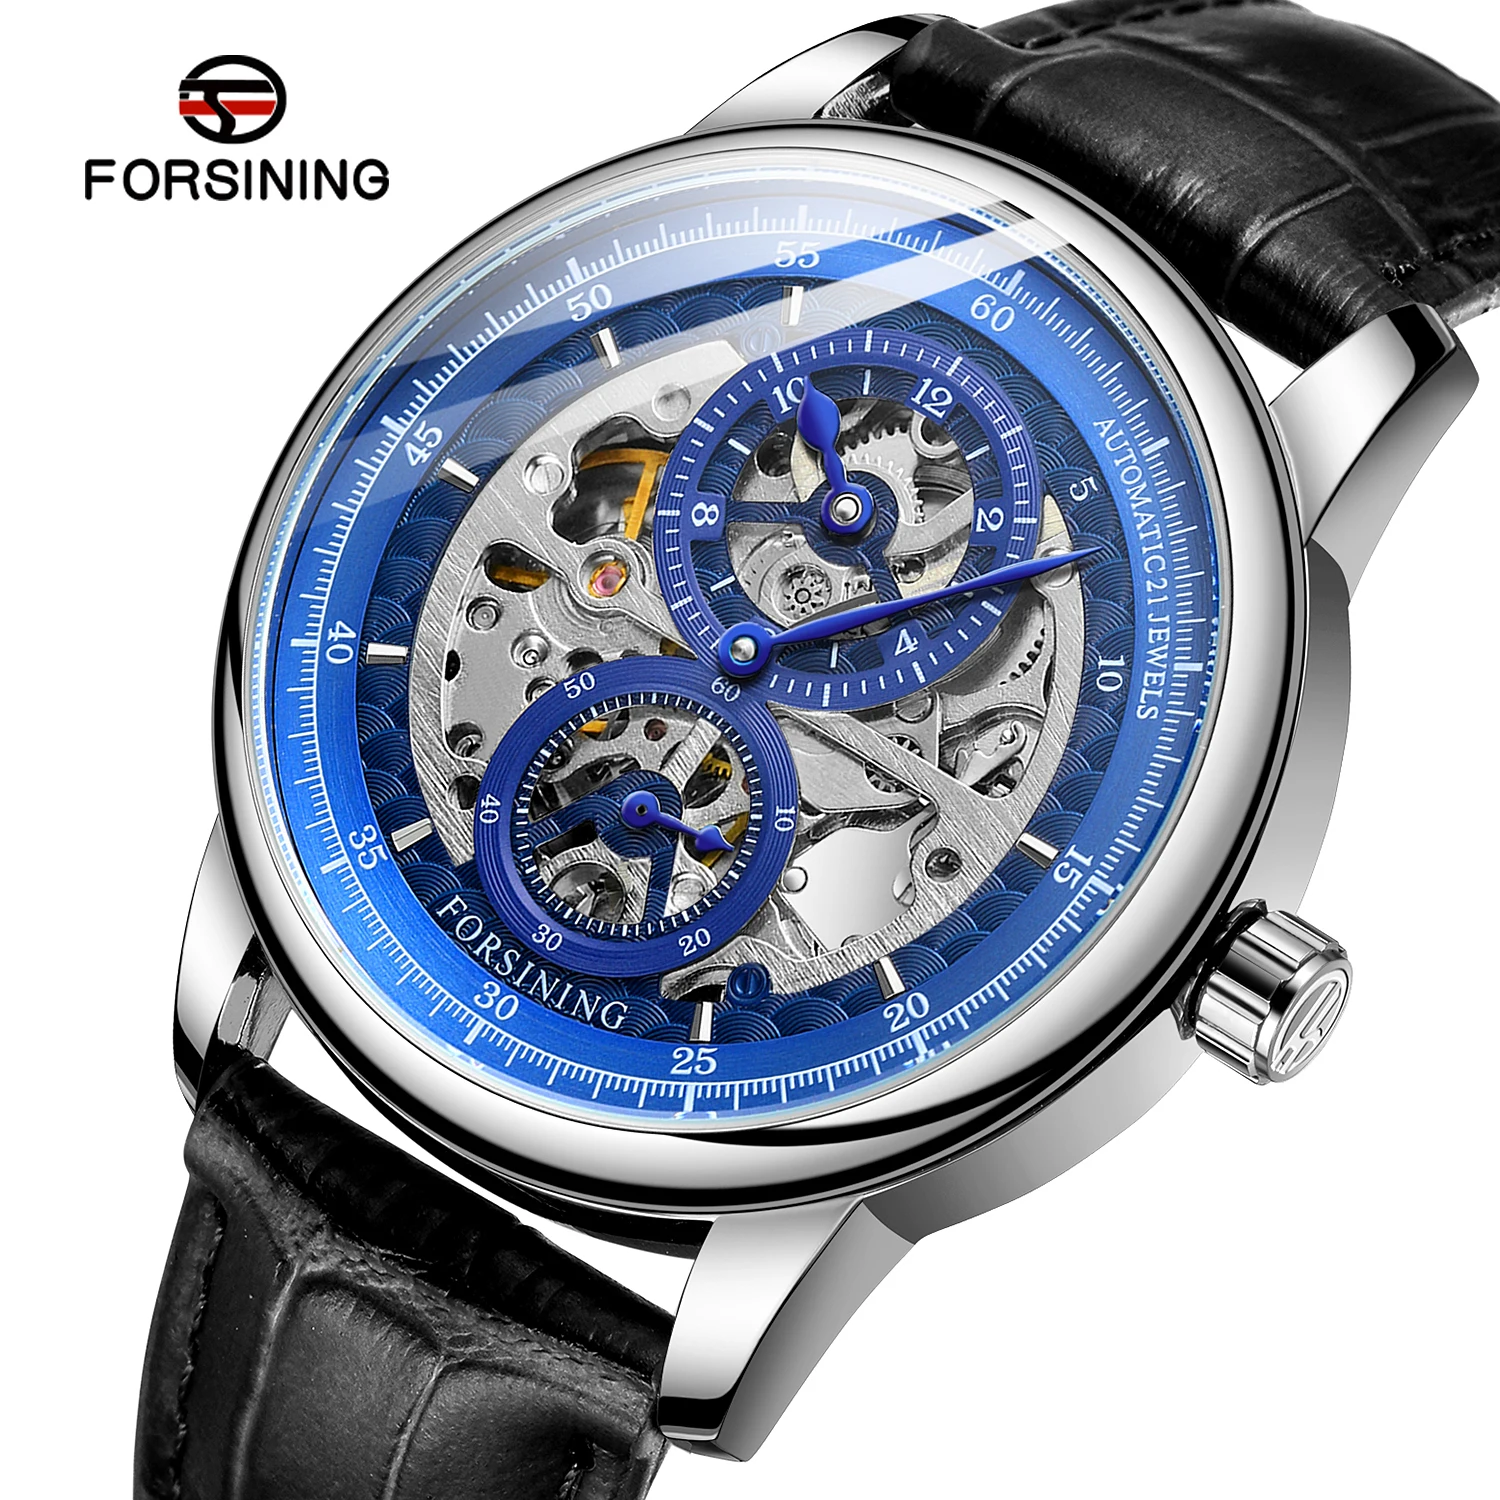 

Forsining Watch True Leather Strap Skeleton Automatic Machanical Men's Watches For Man Fashion Business Watch Relogio Masculino